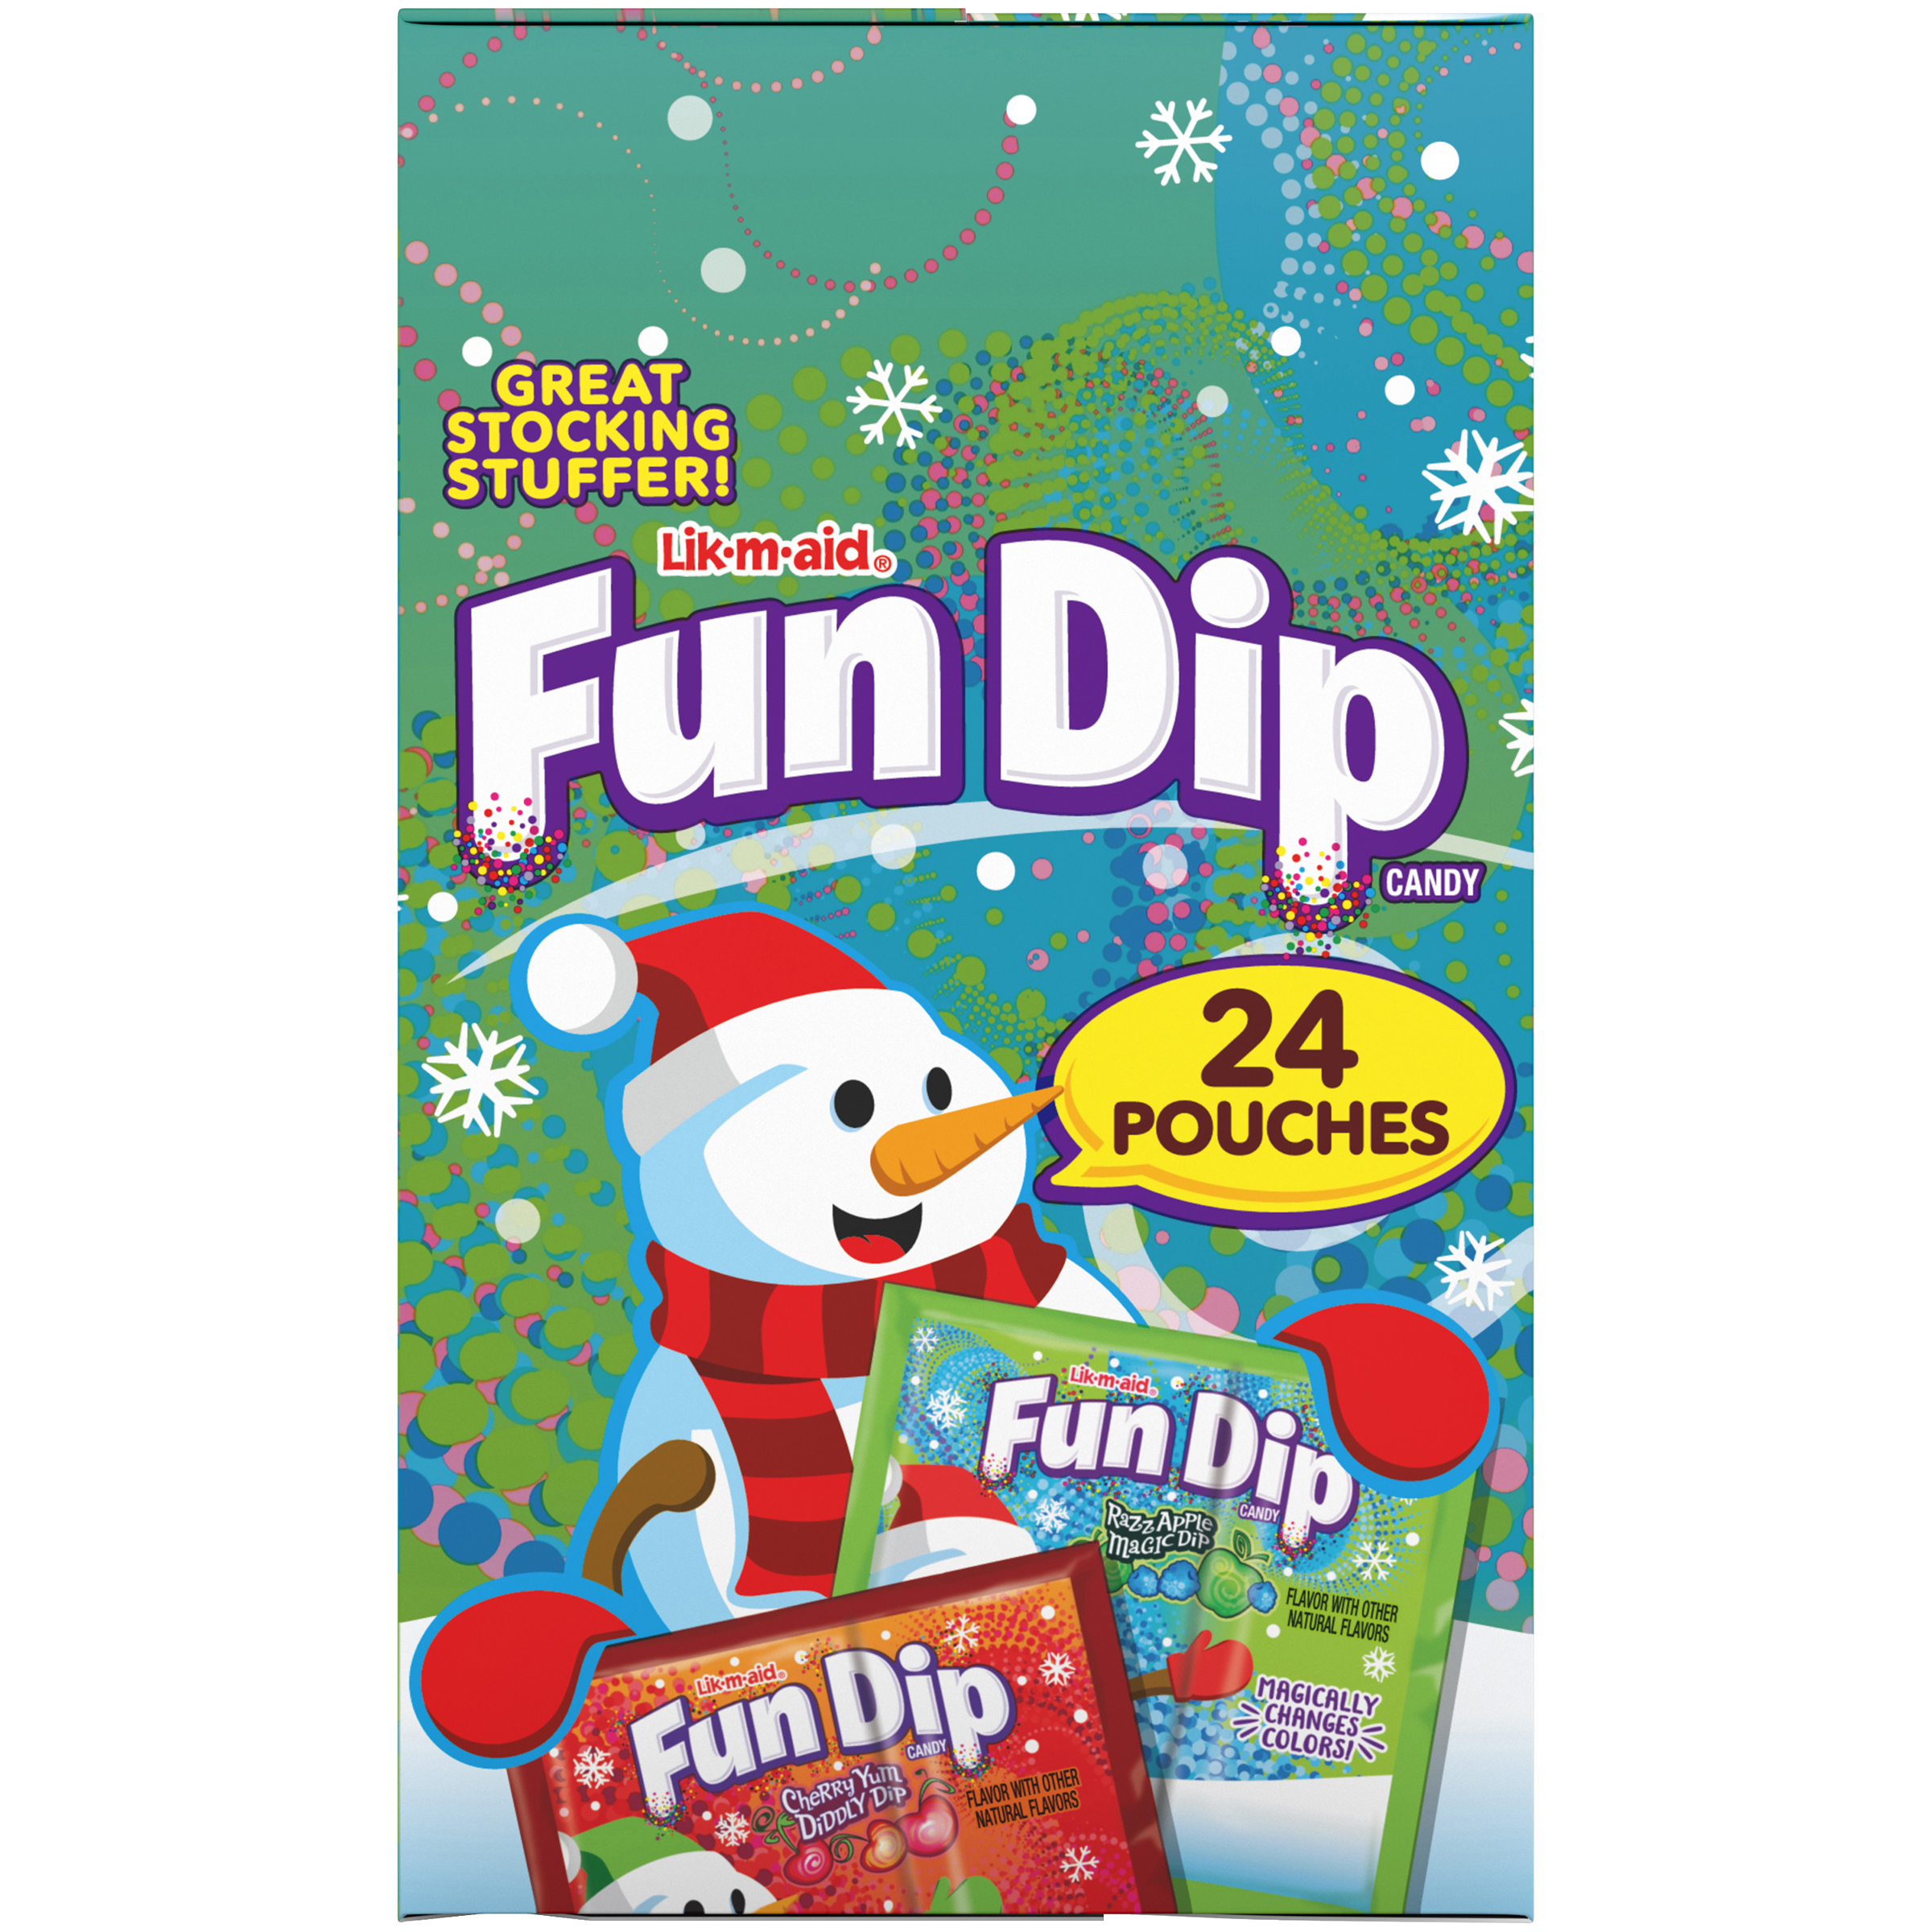 Fun Dip Candy Holiday Variety Pack, Holiday Candy, Christmas Stocking Stuffers 24 Pouches, 10.3oz - image 2 of 11